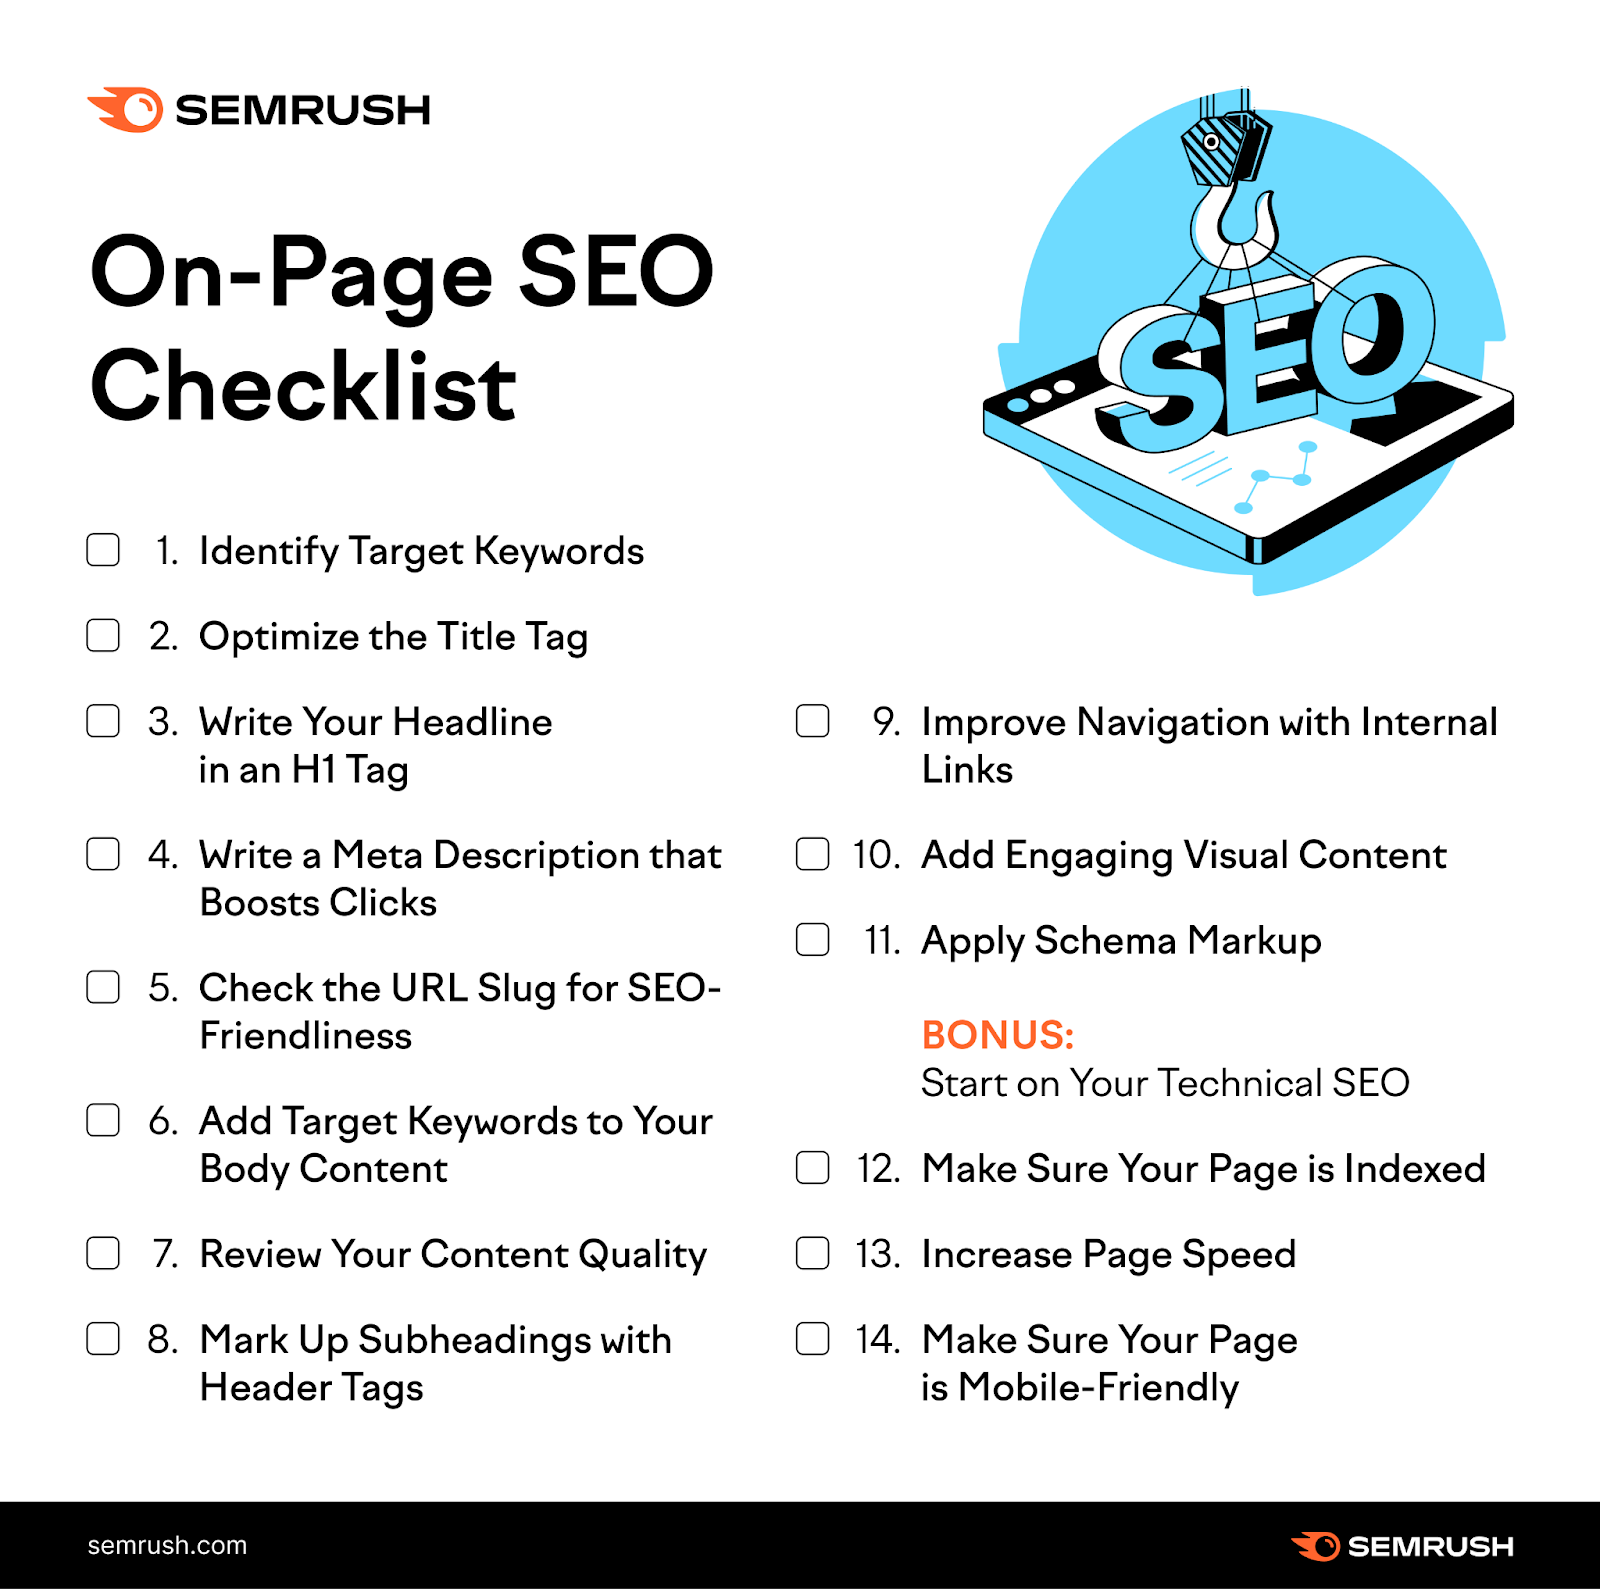 an infographic by Semrush "On-Page SEO Checklist"